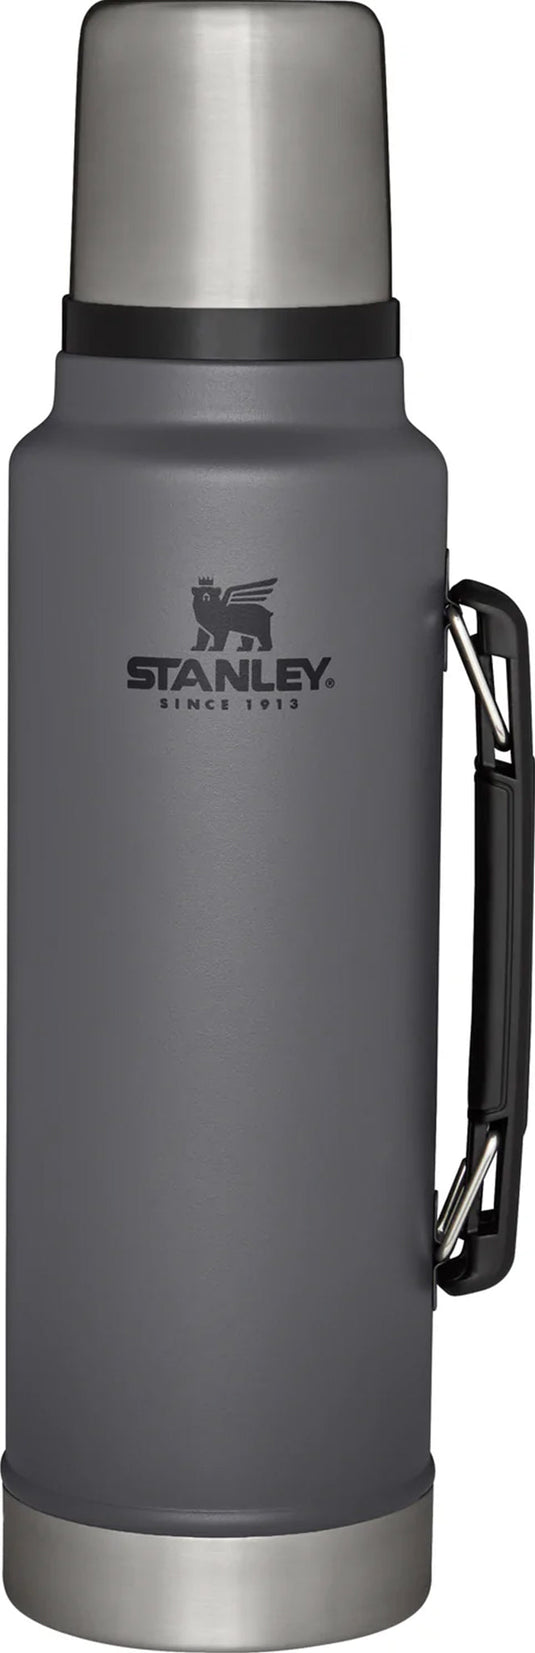 Stanley Legendary Classic 1.5 Qt Charcoal BPA Free Insulated Bottle